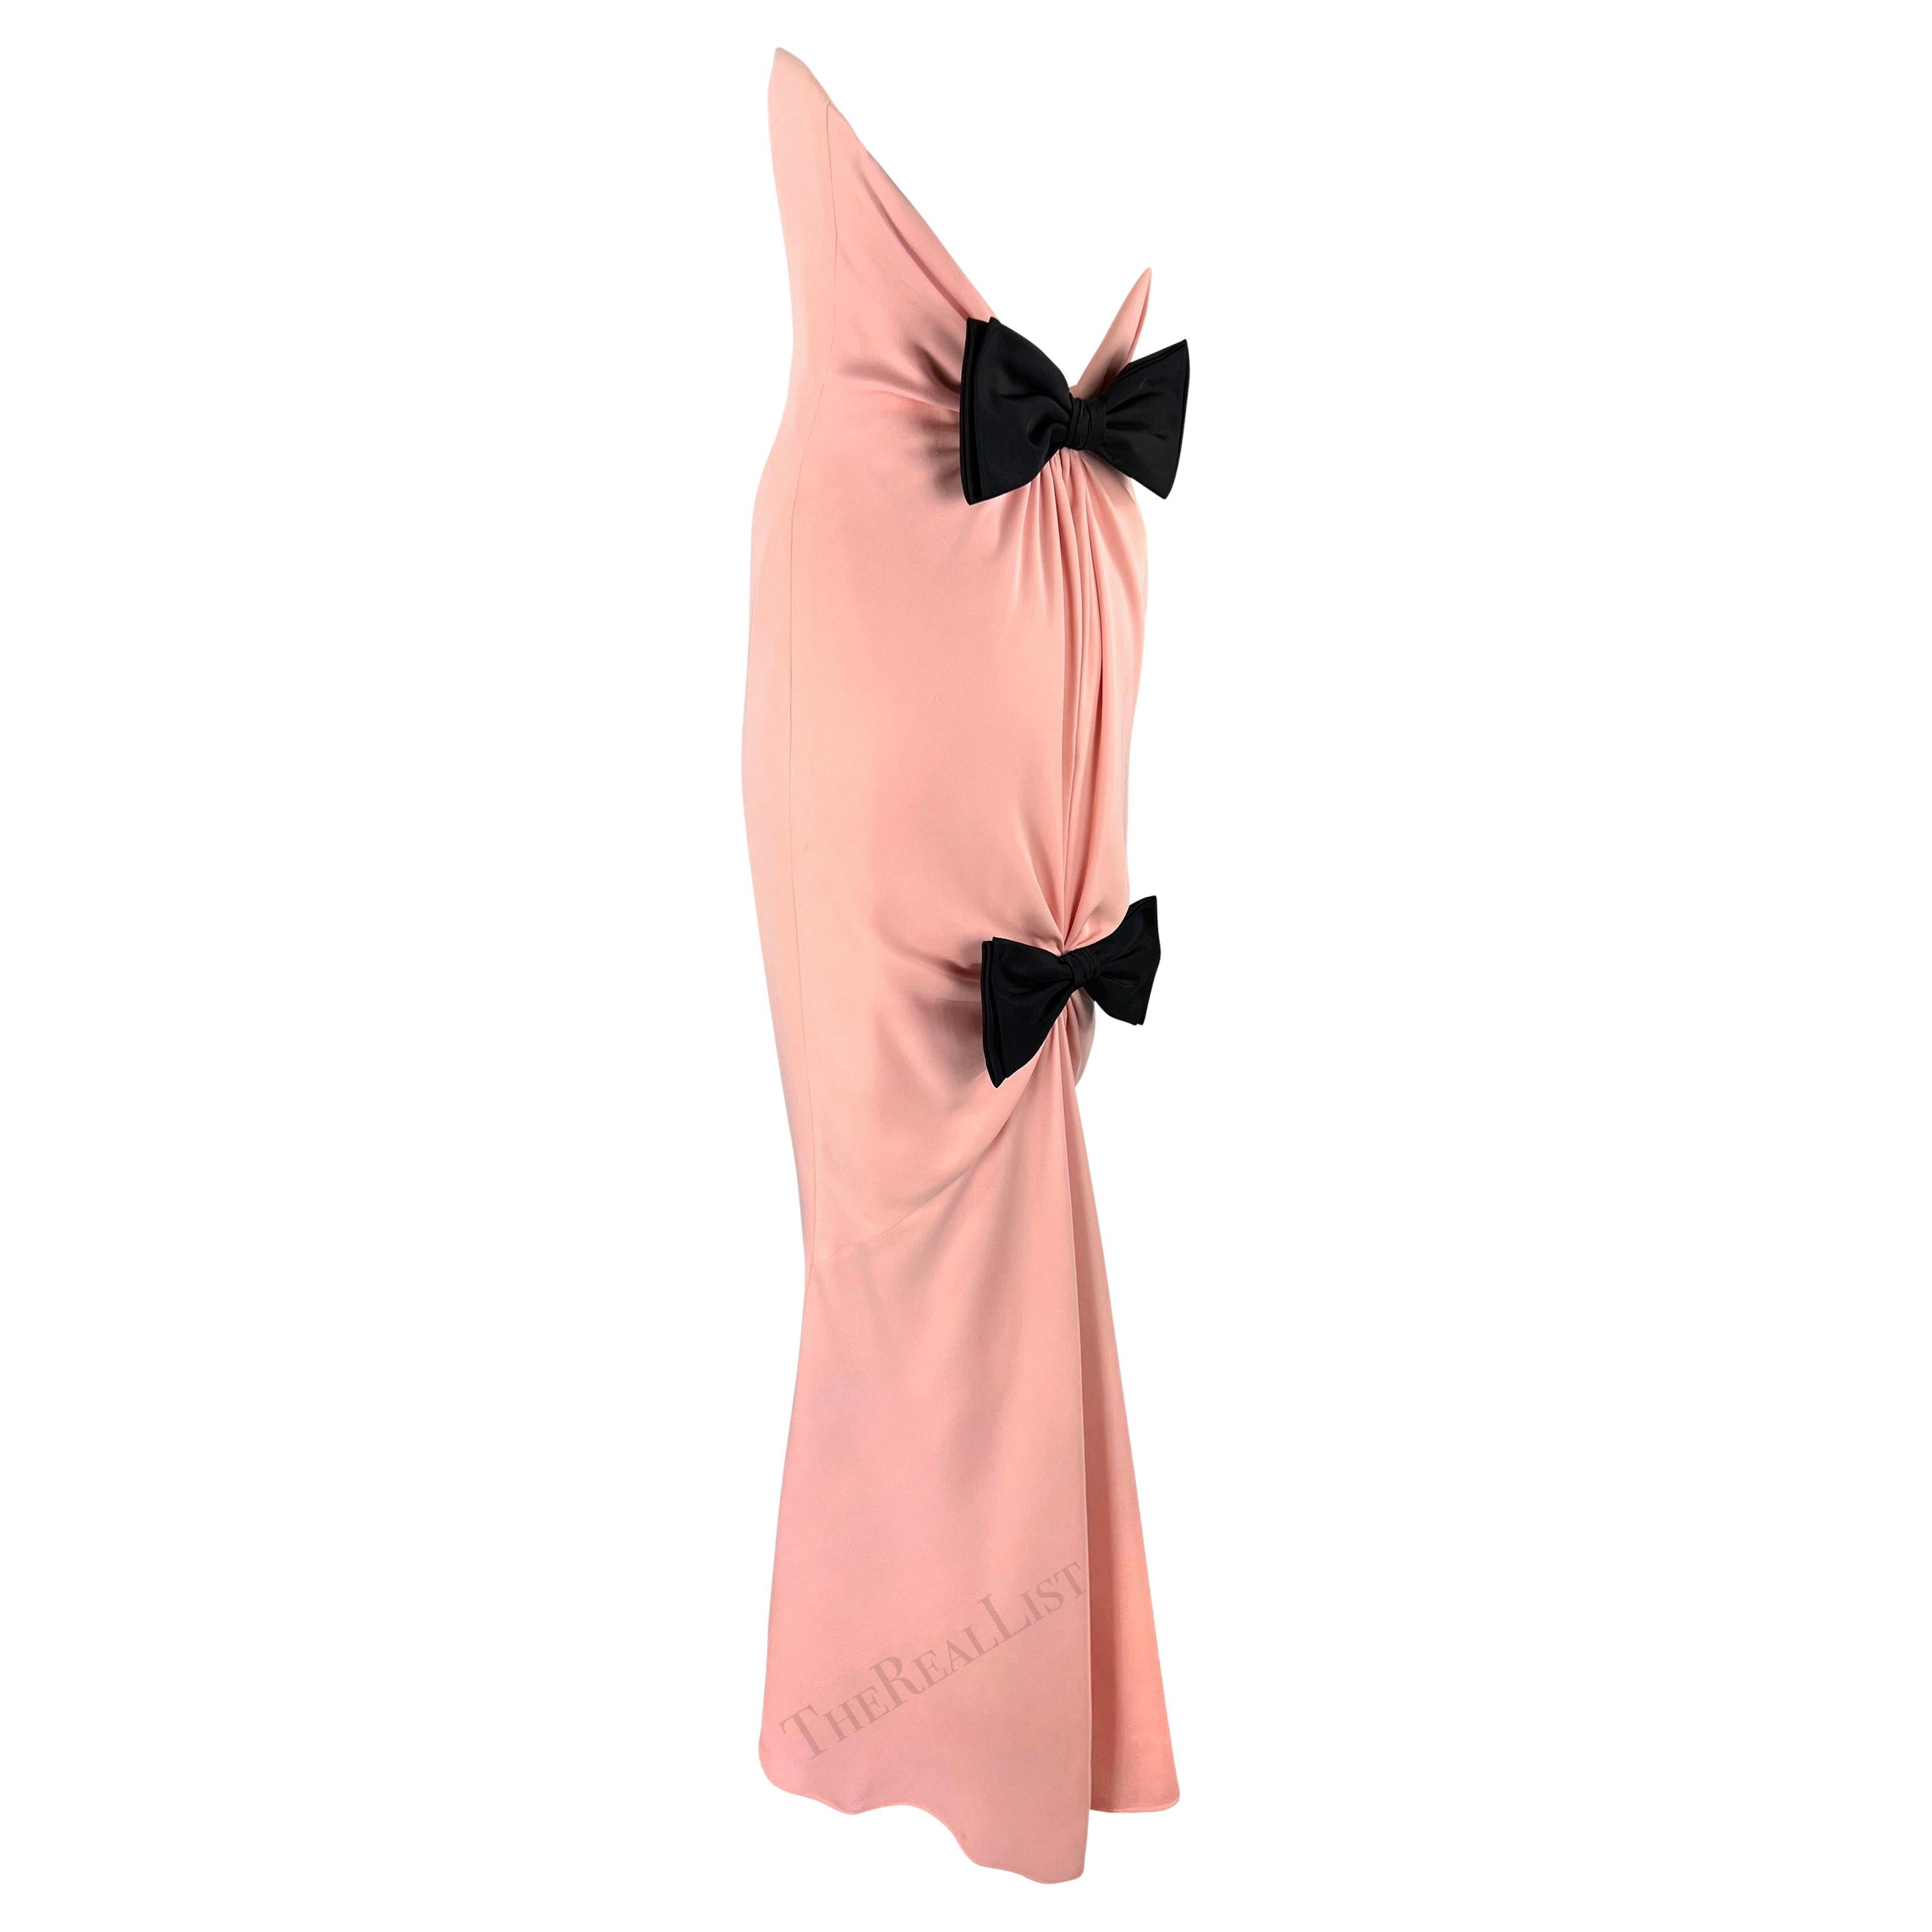 S/S 1985 Valentino Haute Couture Documented Pink Silk Chiffon Bow Strapless Gown For Sale 1